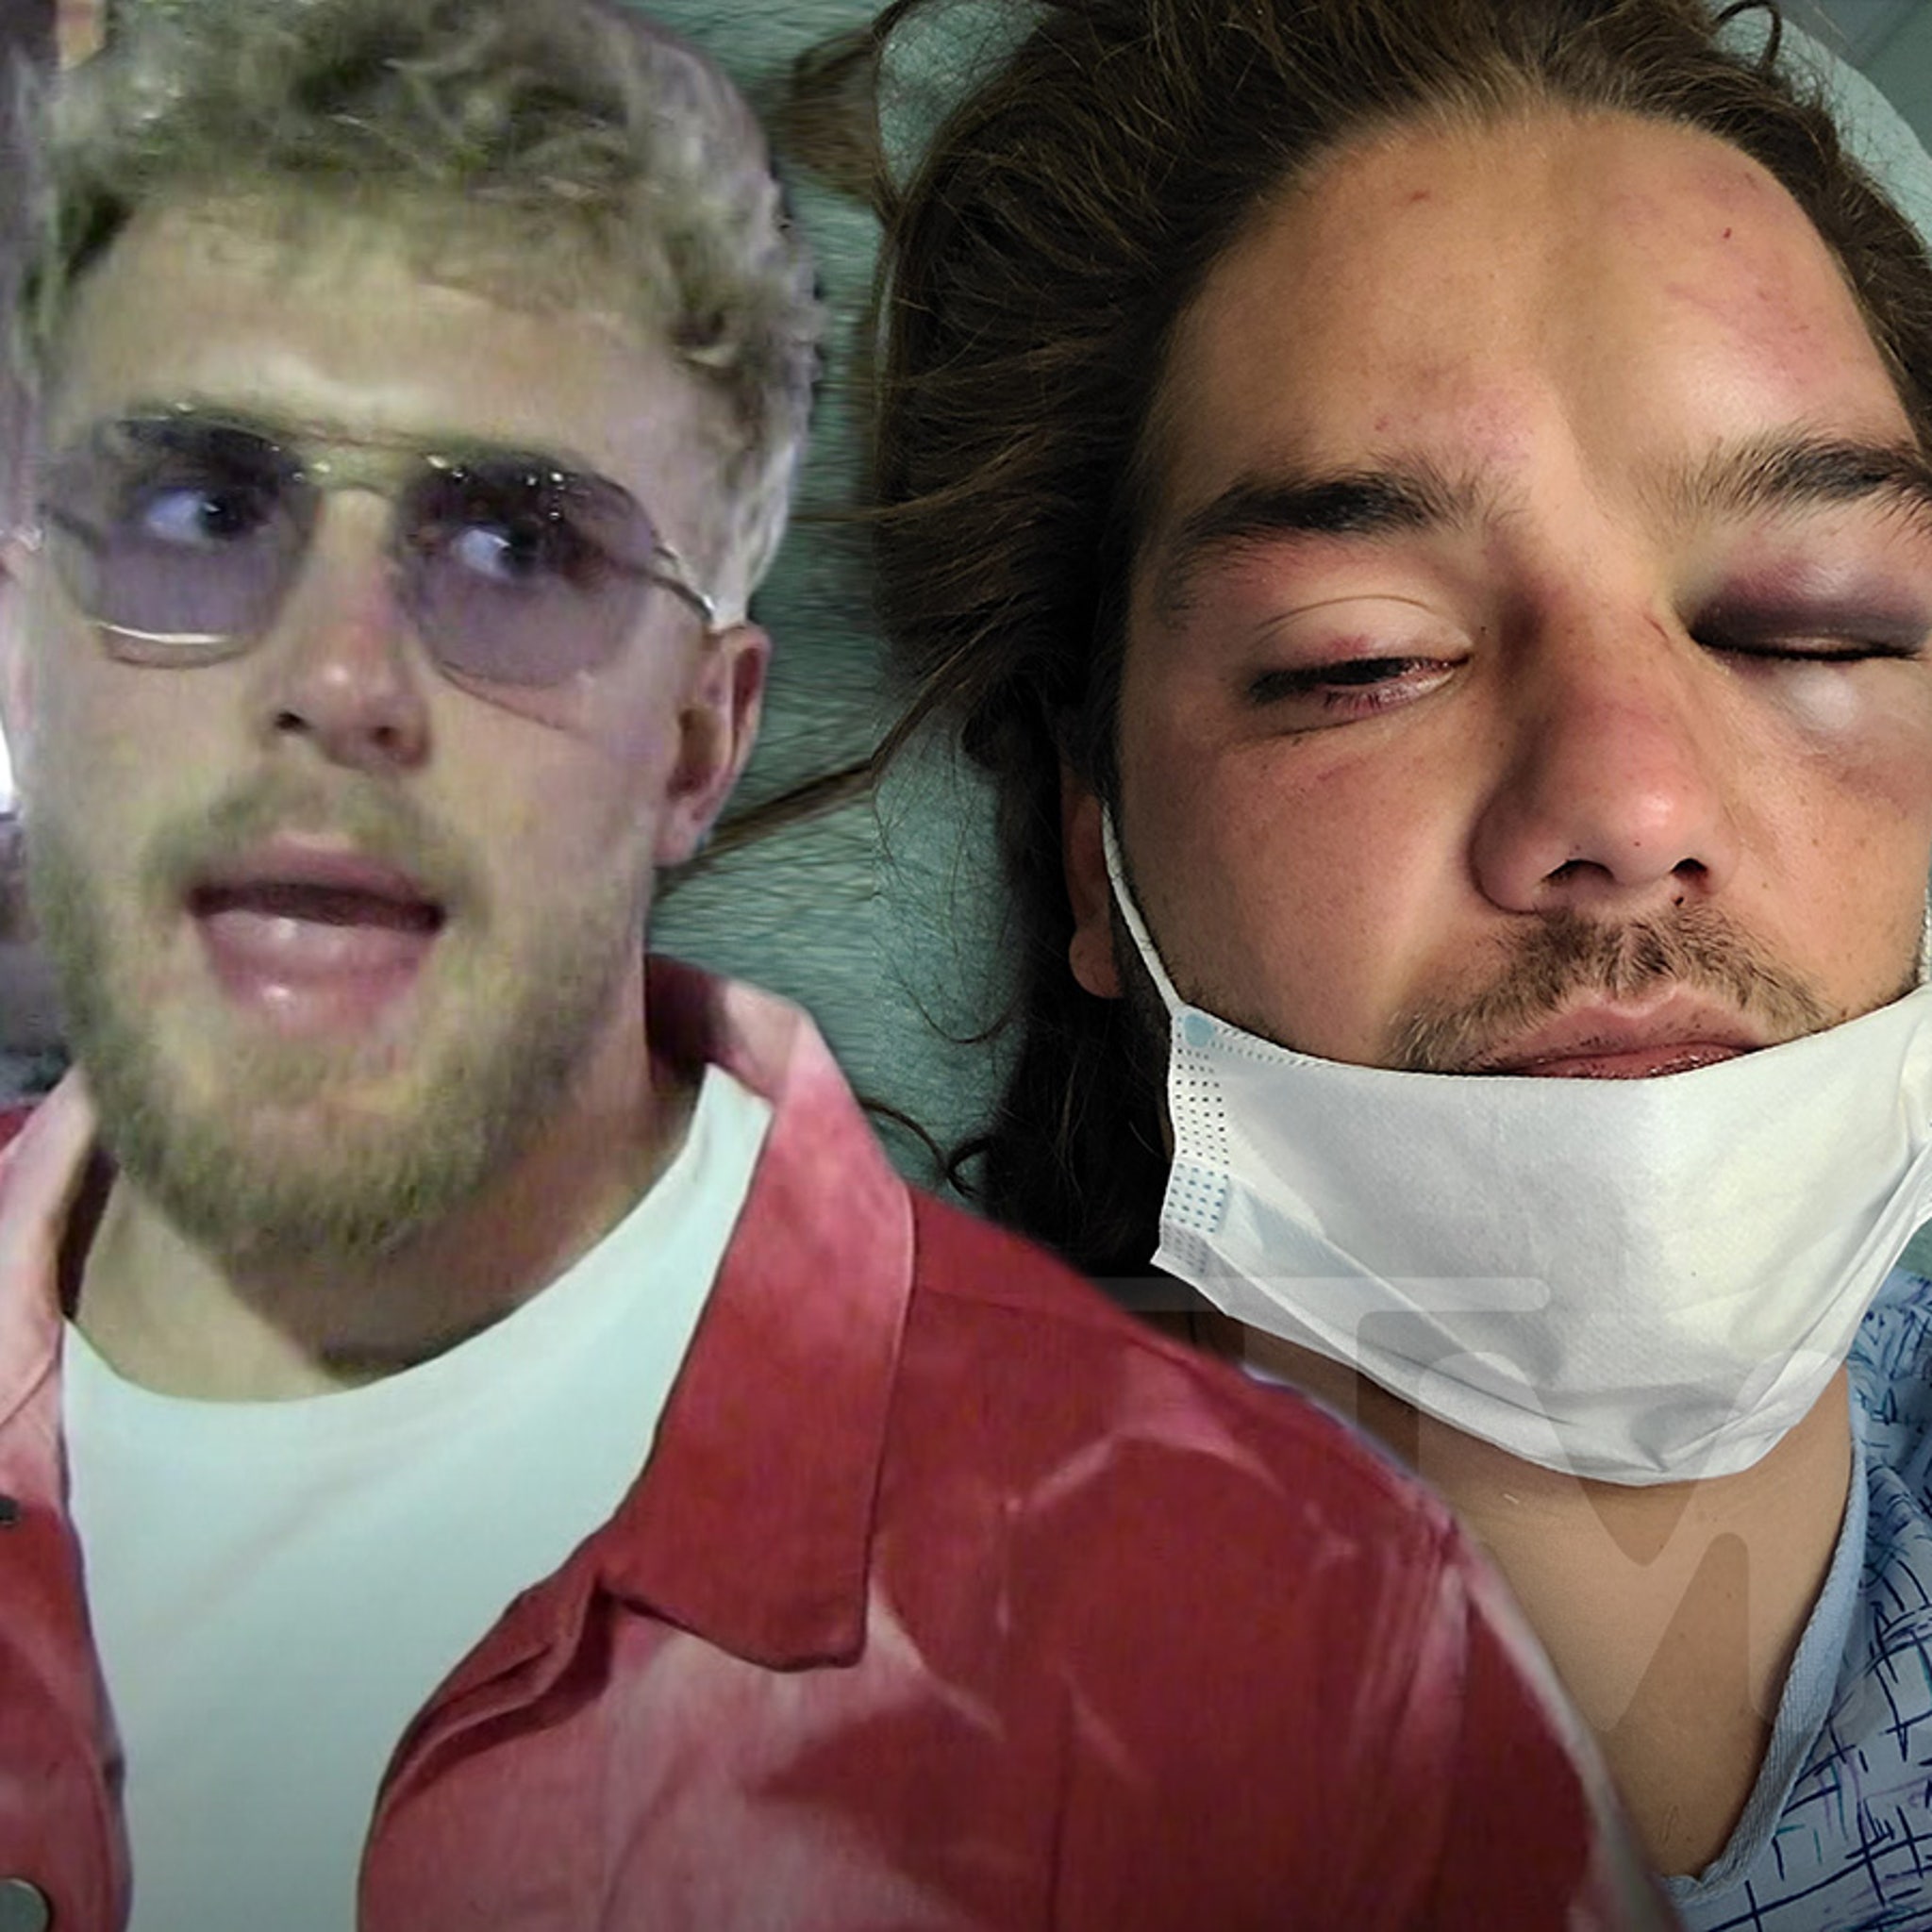 spids Slumber Autonomi Jake Paul Sued By Man Claiming He Got Beat Up at House Party